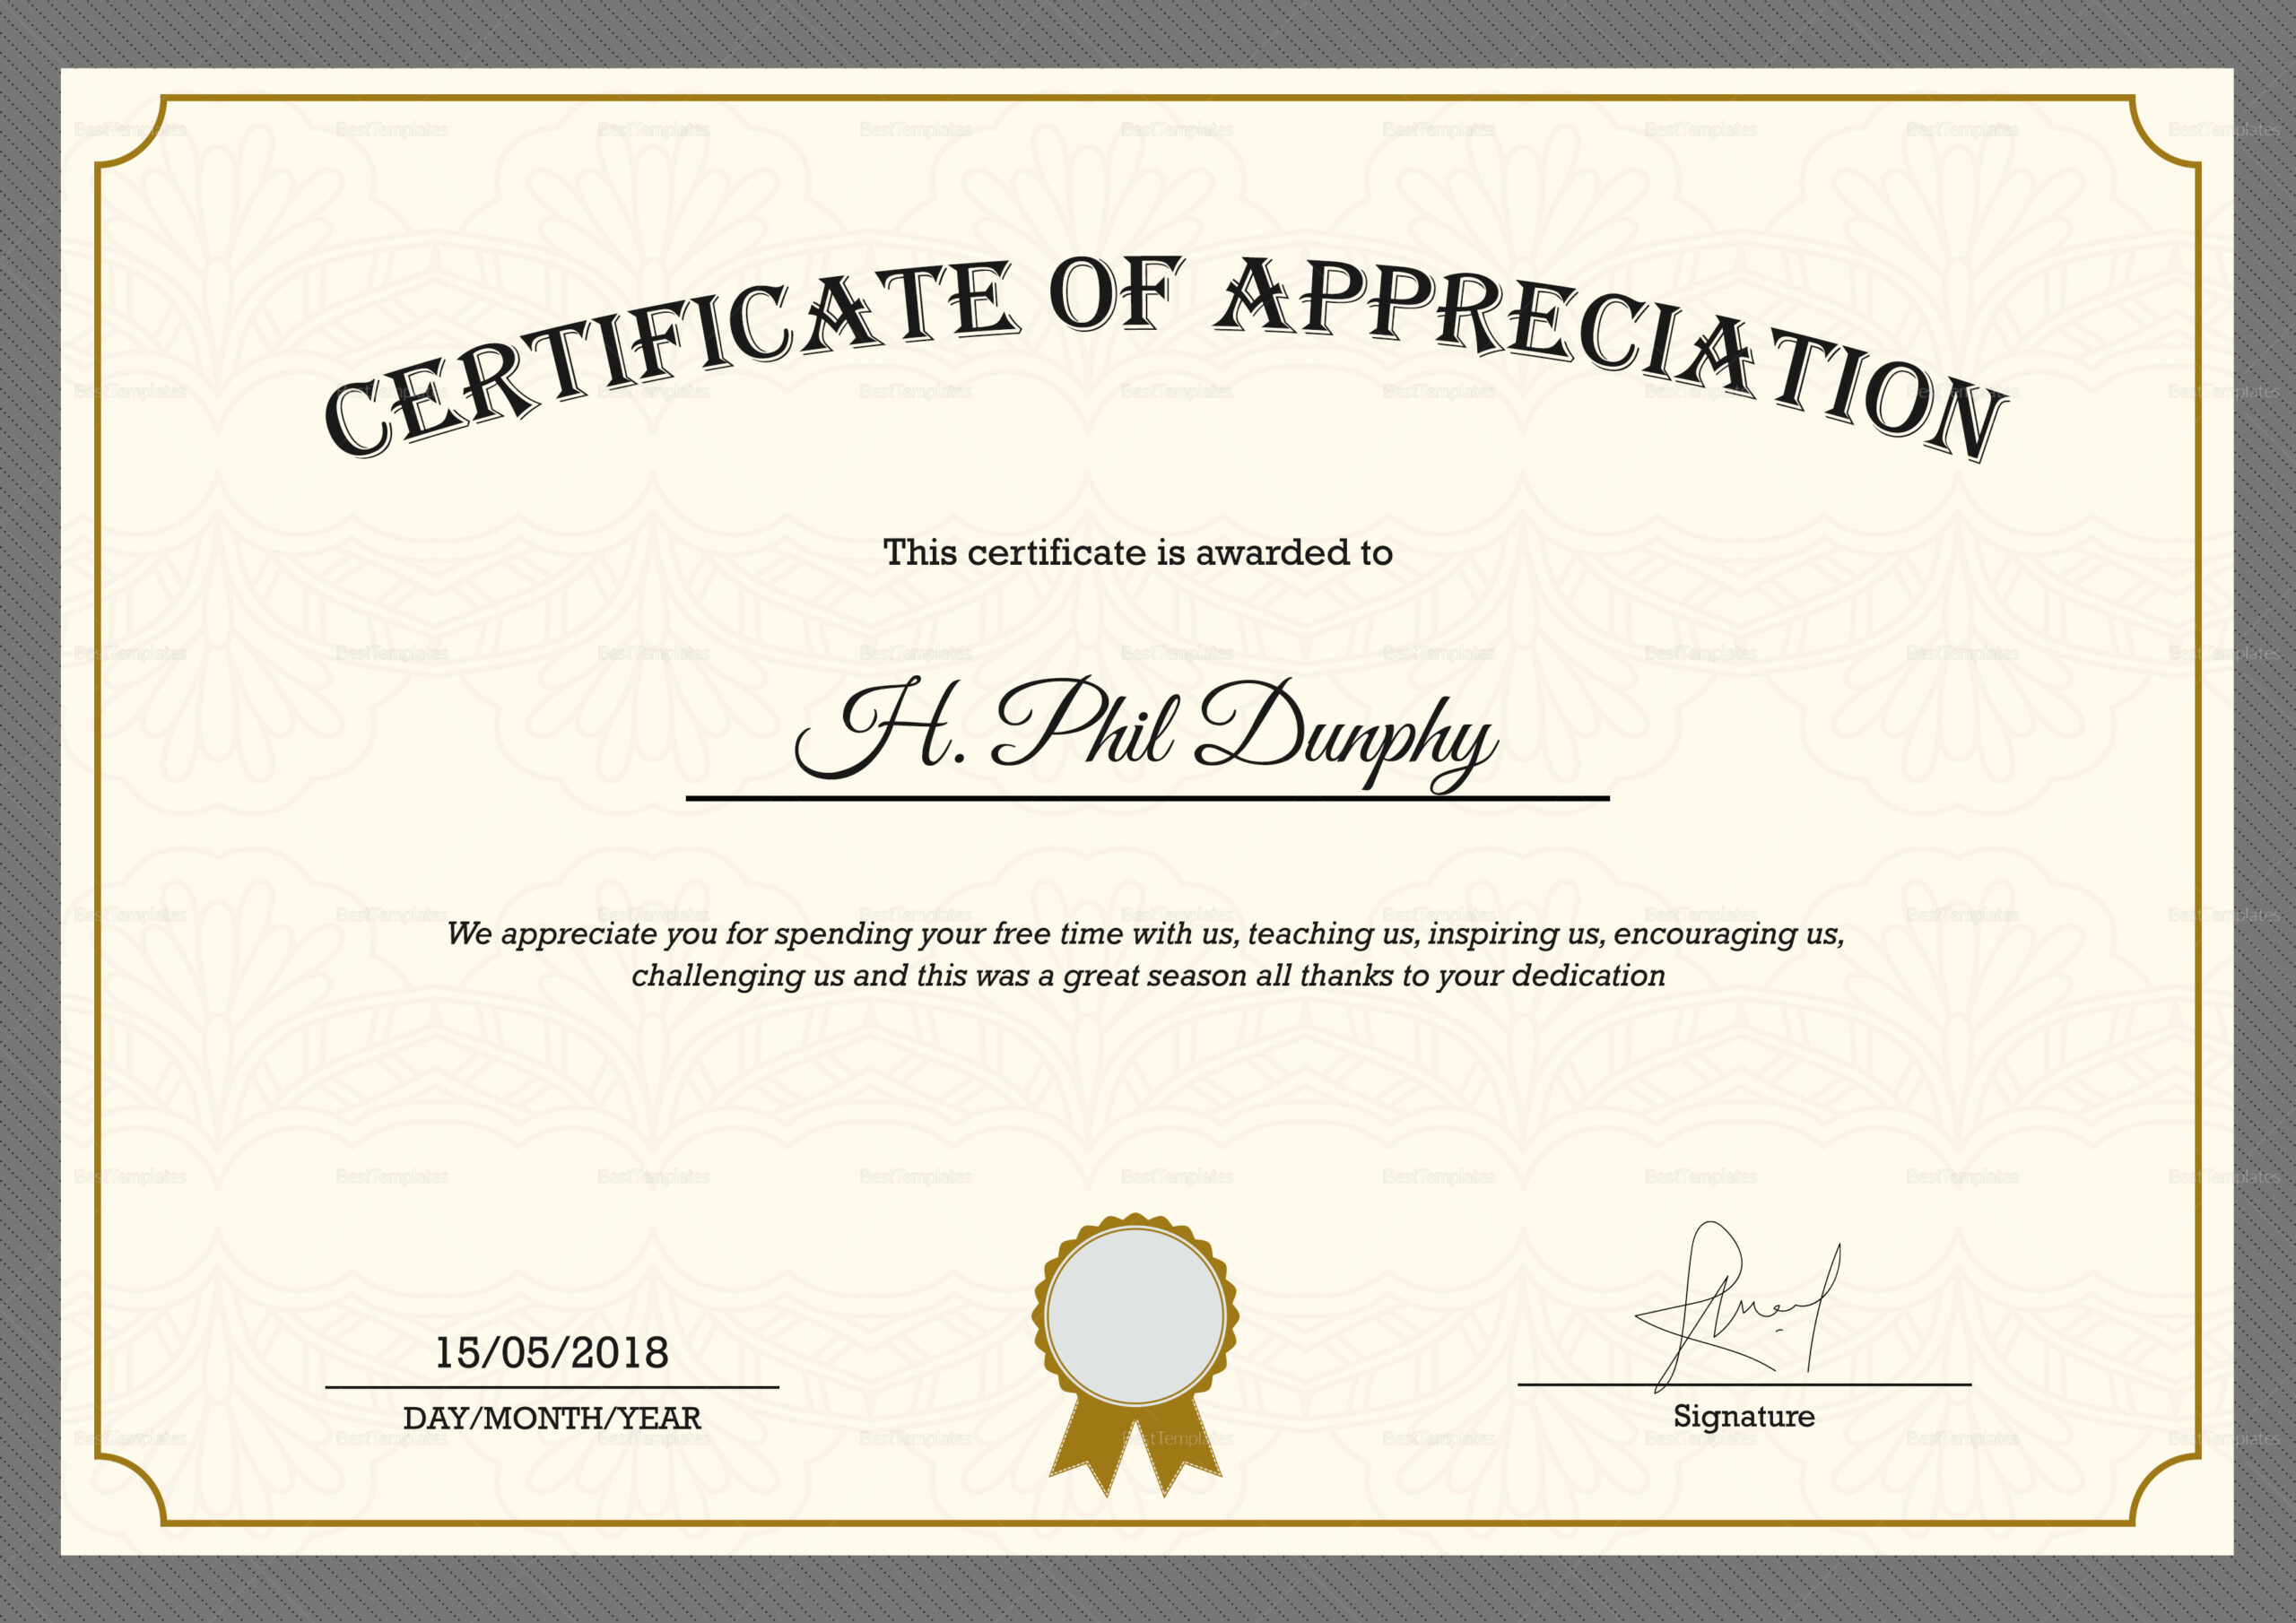 Sample Company Appreciation Certificate Design Template In Psd, Word with Certificate Of Appreciation Template Free Printable